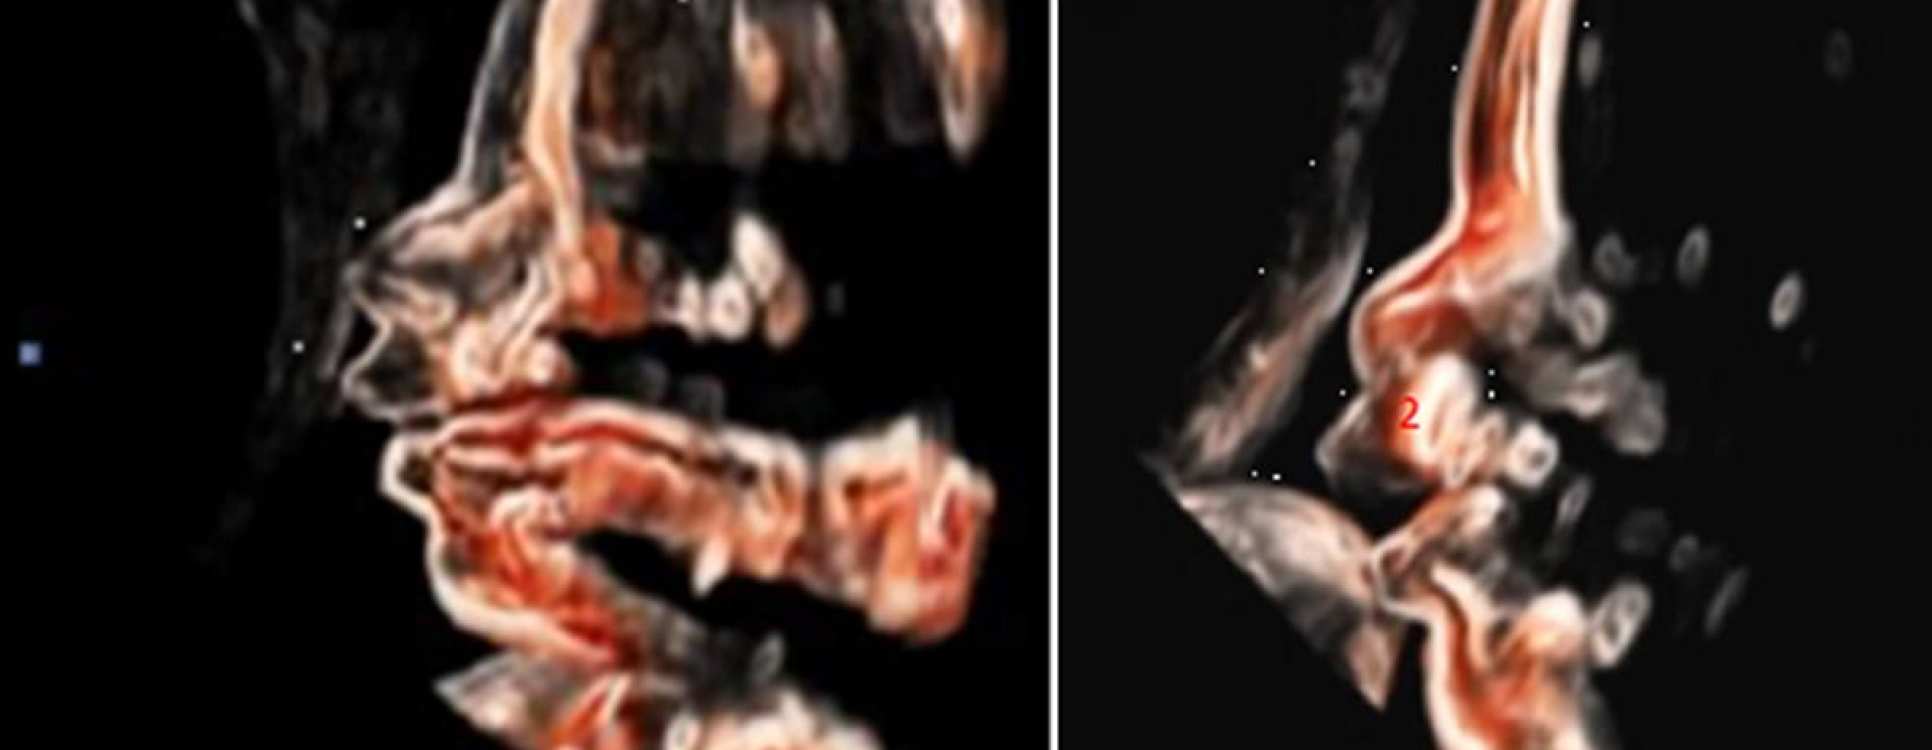 Imaging of a baby face